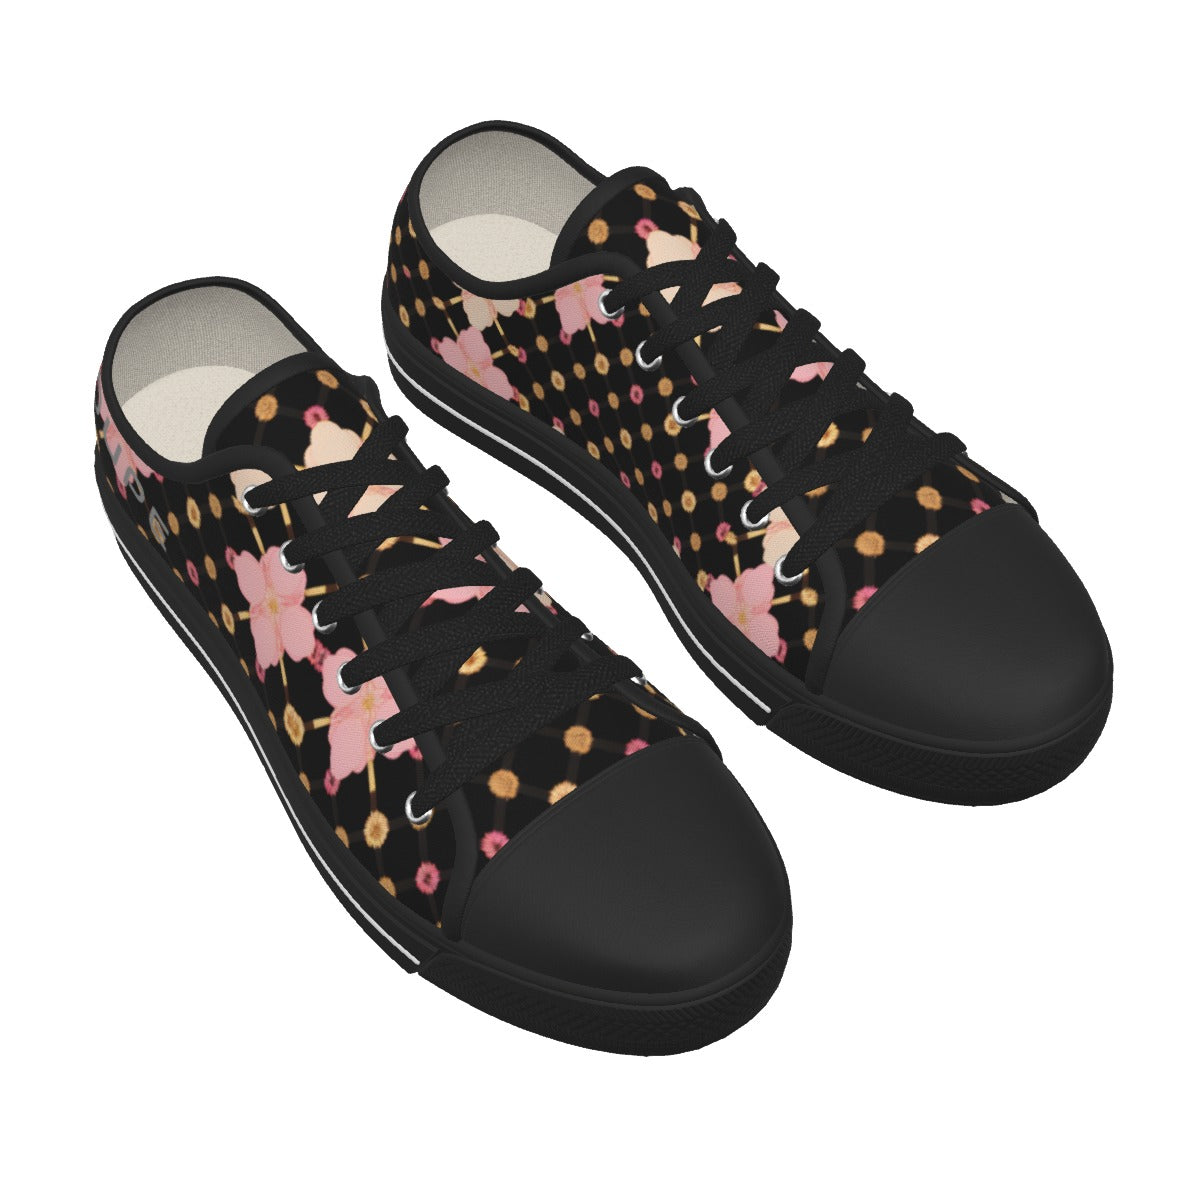 AC KAMI OUPE All-Over Print Women's Low-cut Canvas Shoes